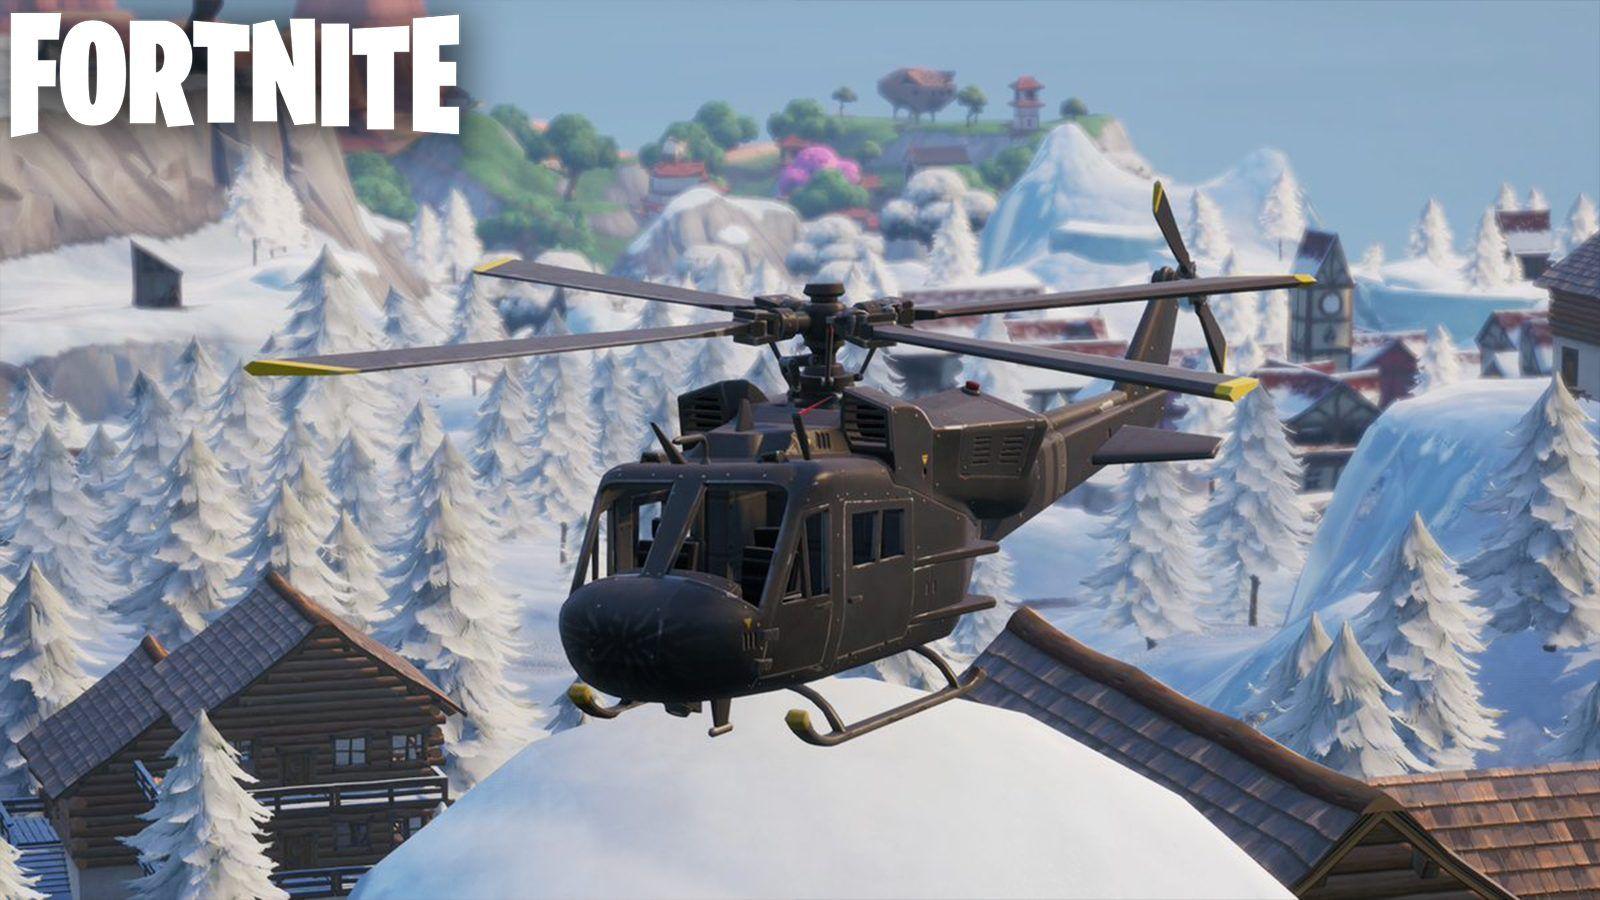 Hélicoptère Fortnite Epic Games